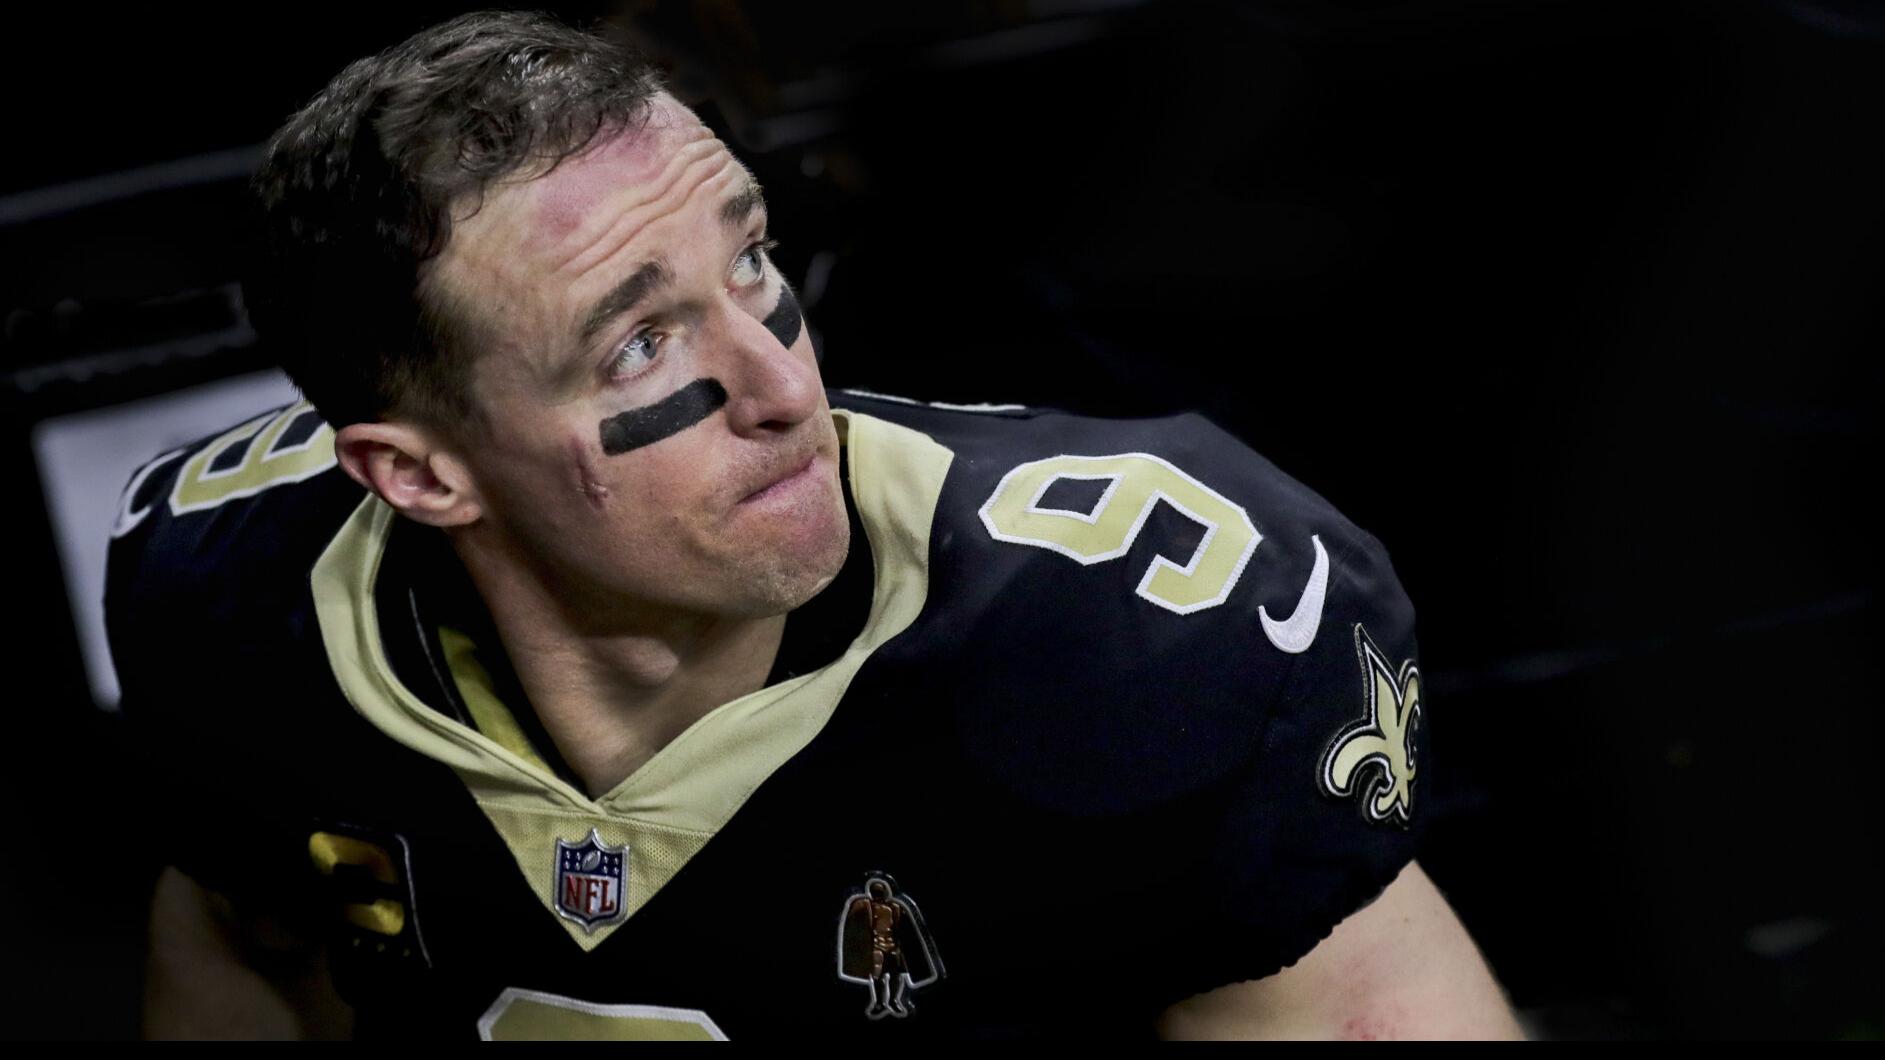 Drew Brees' final look back: As he left the field one last time, what did  he see? What did you see?, Drew Brees